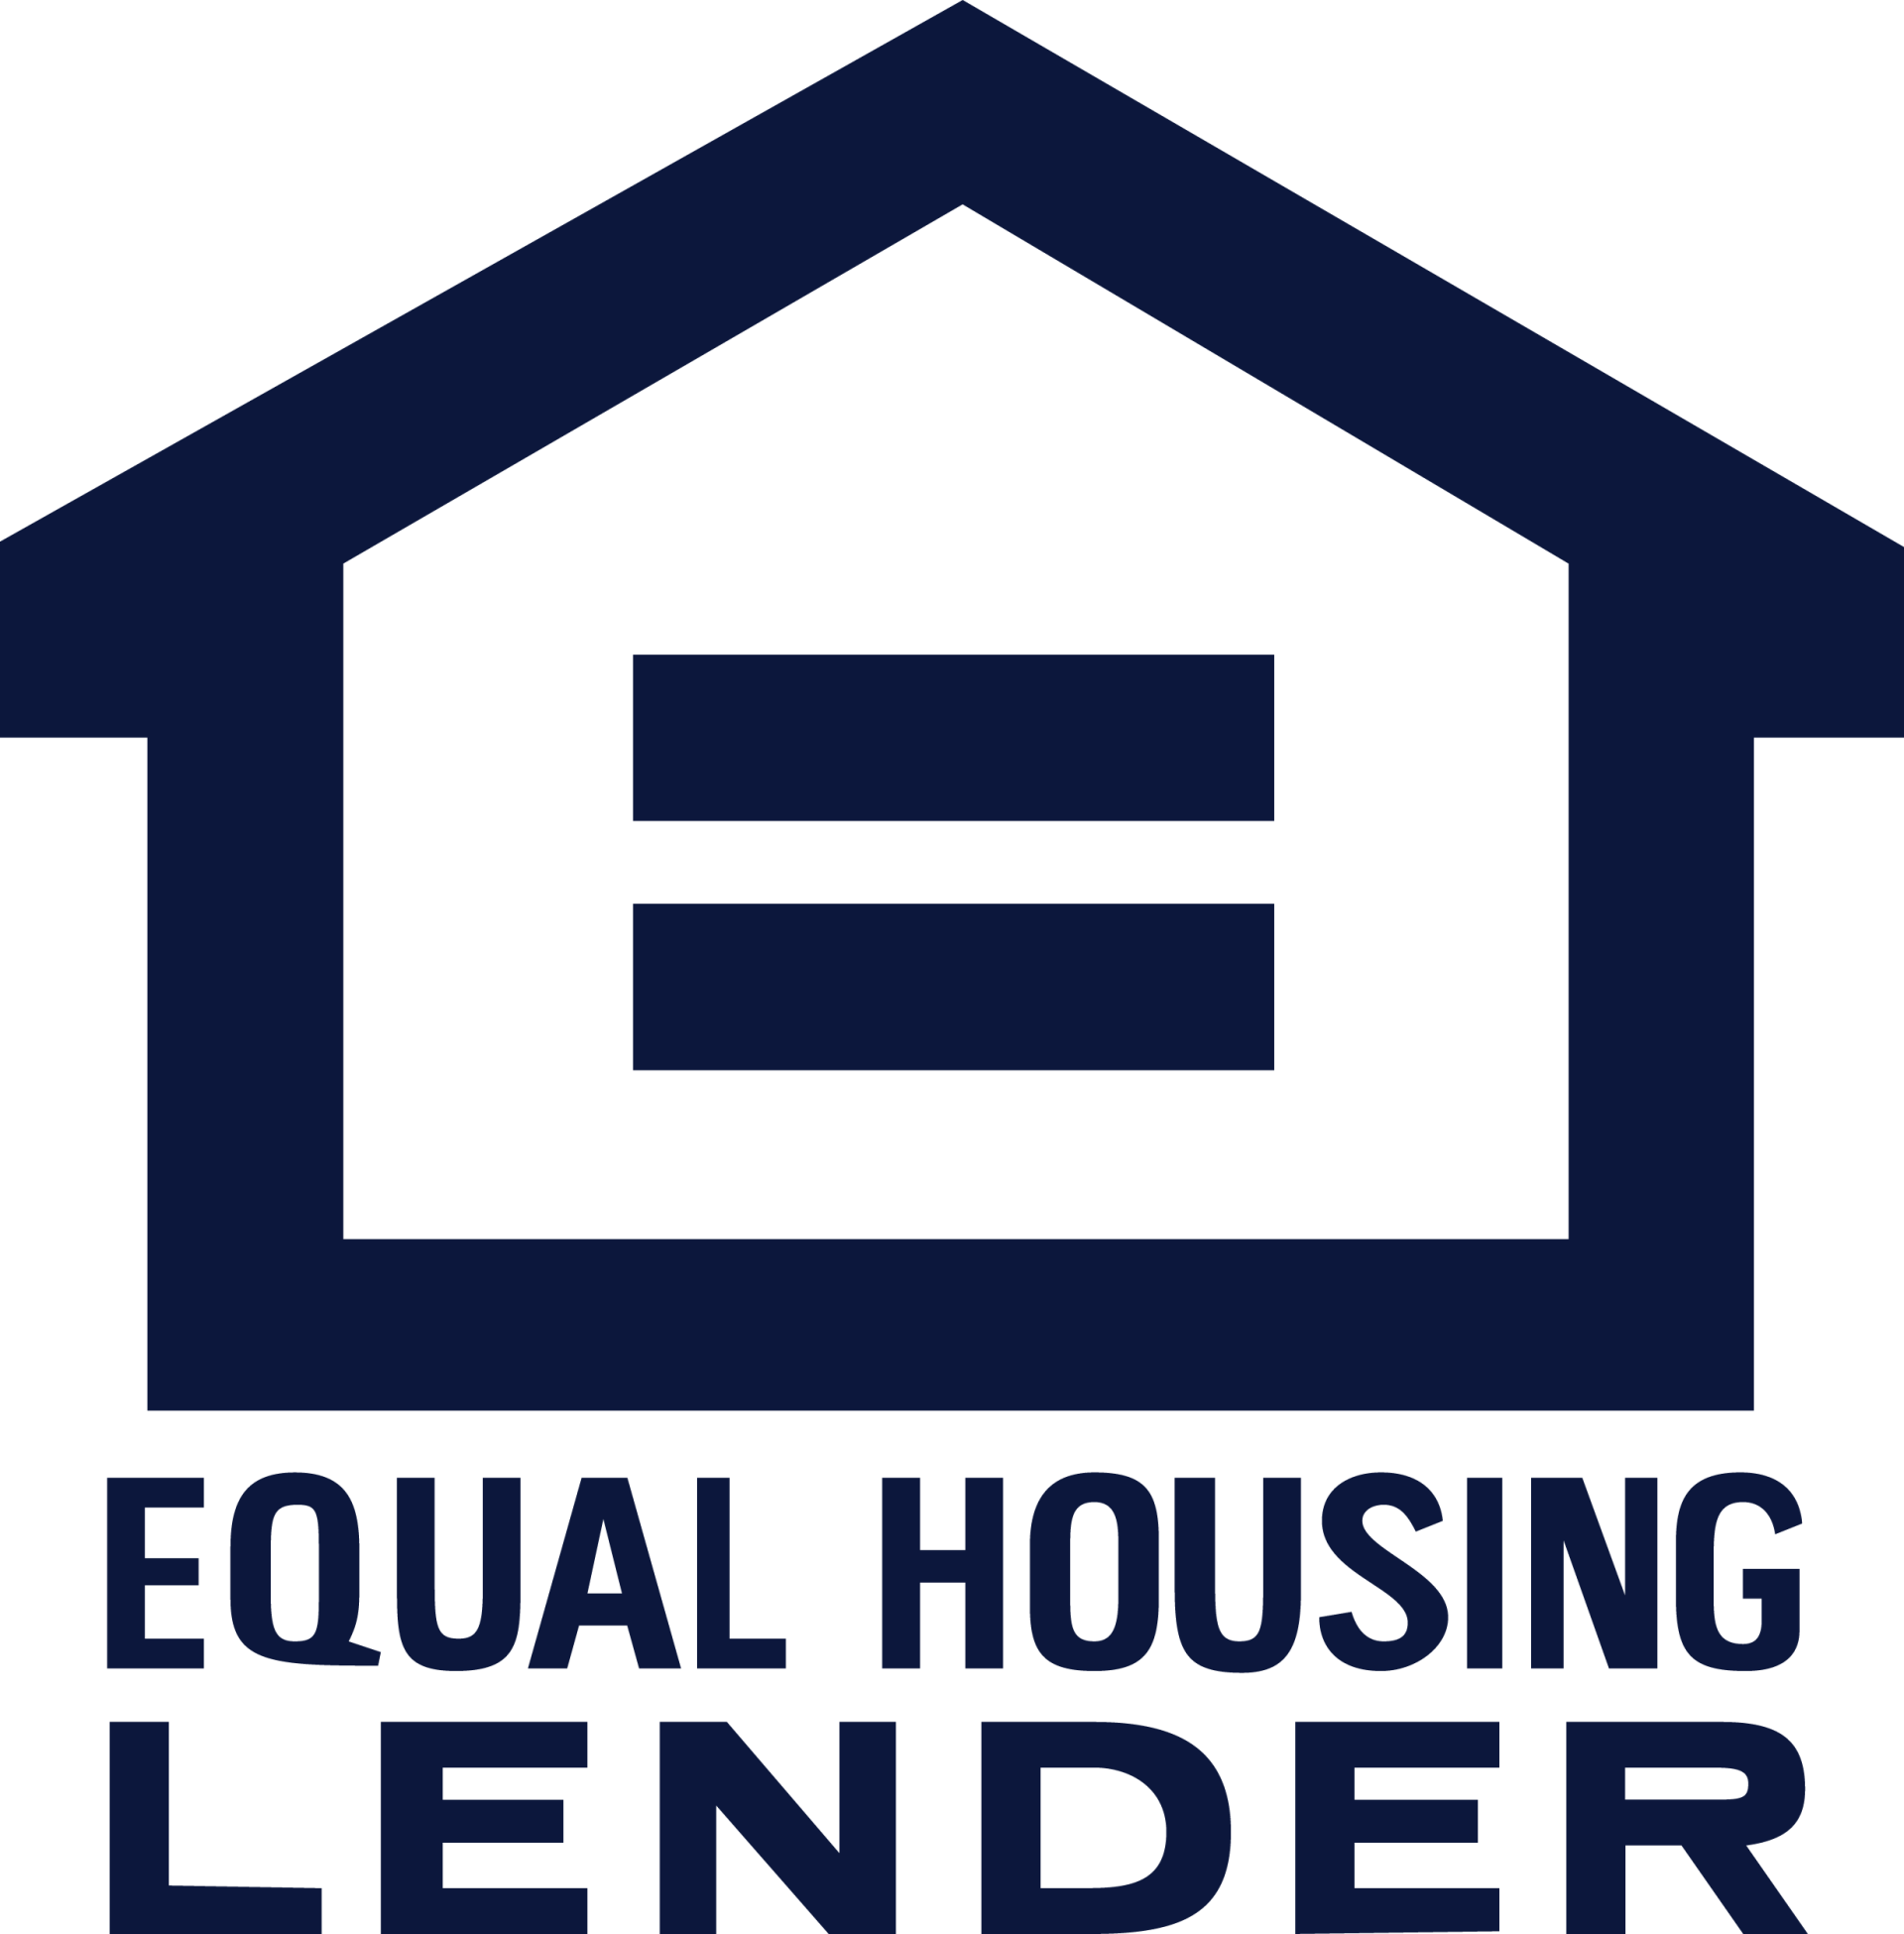 The logo for equal housing lender shows a house with two equal bars on it.